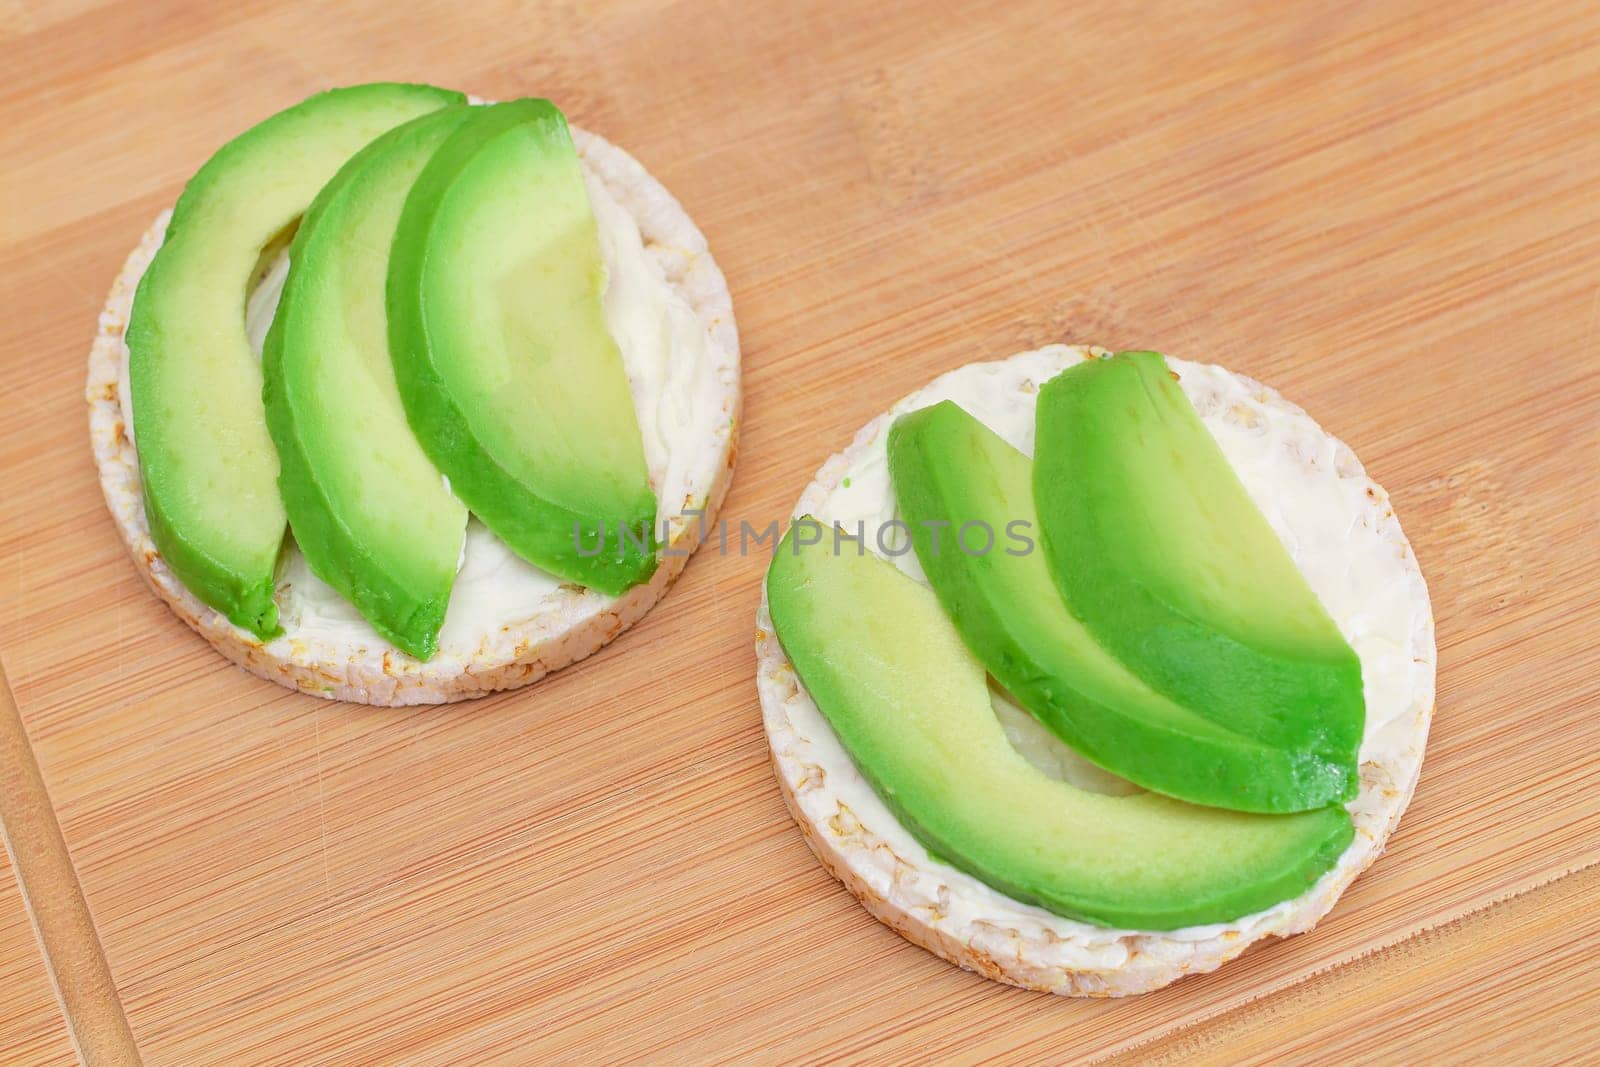 Rice Cake Sandwiches with Fresh Avocado and Cream Cheese by InfinitumProdux